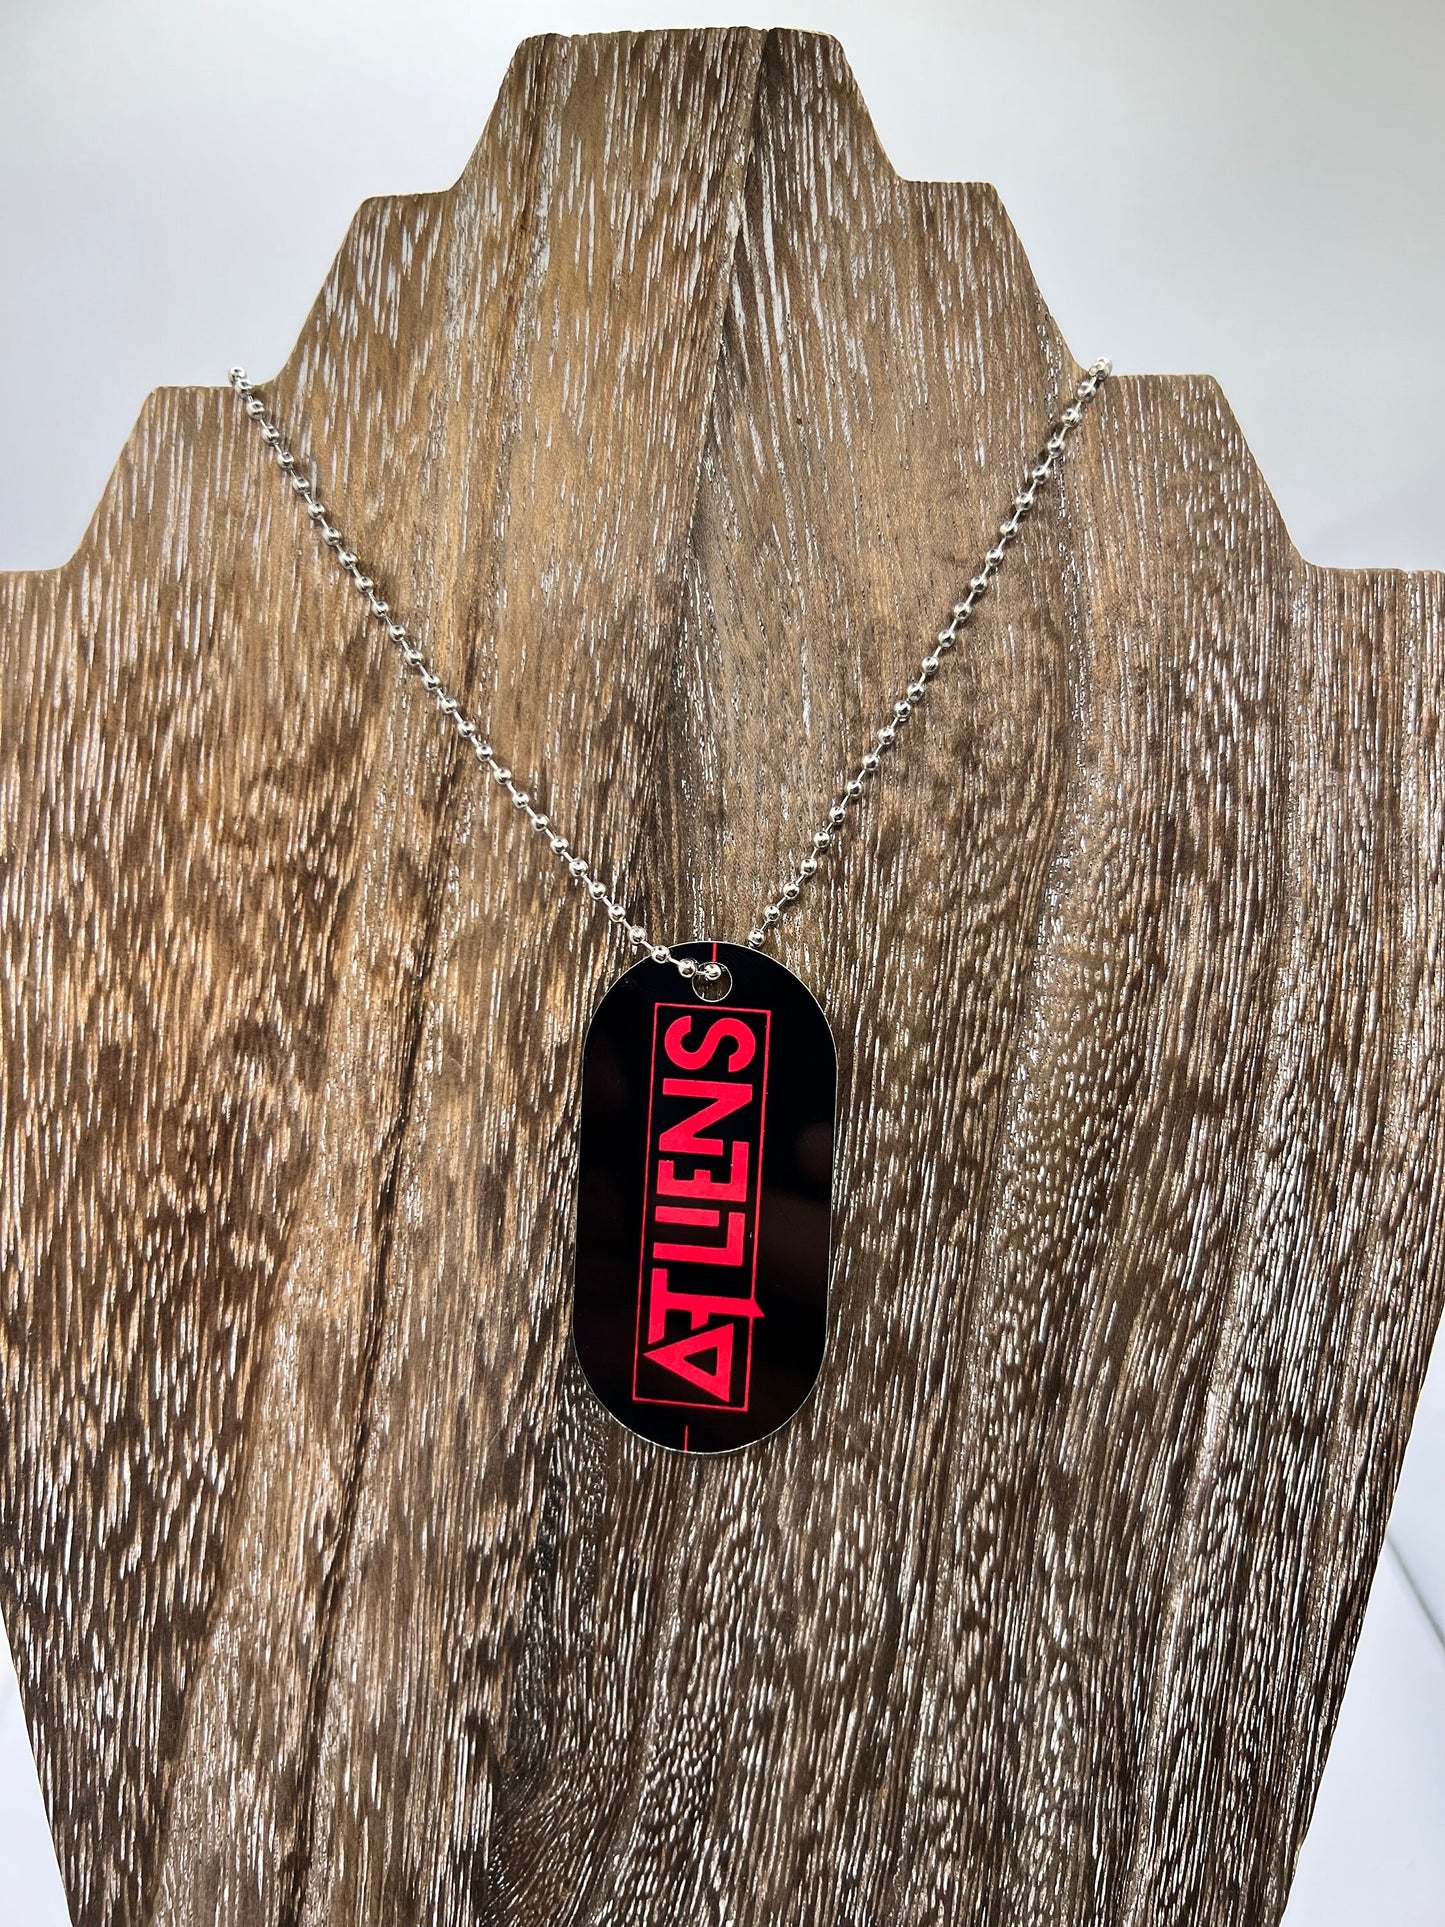 ATLiens  double sided Necklace Dogtag Chain  Dubstep Rave EDM DJ Producer Bass trippy wubz Wook vibe peace love